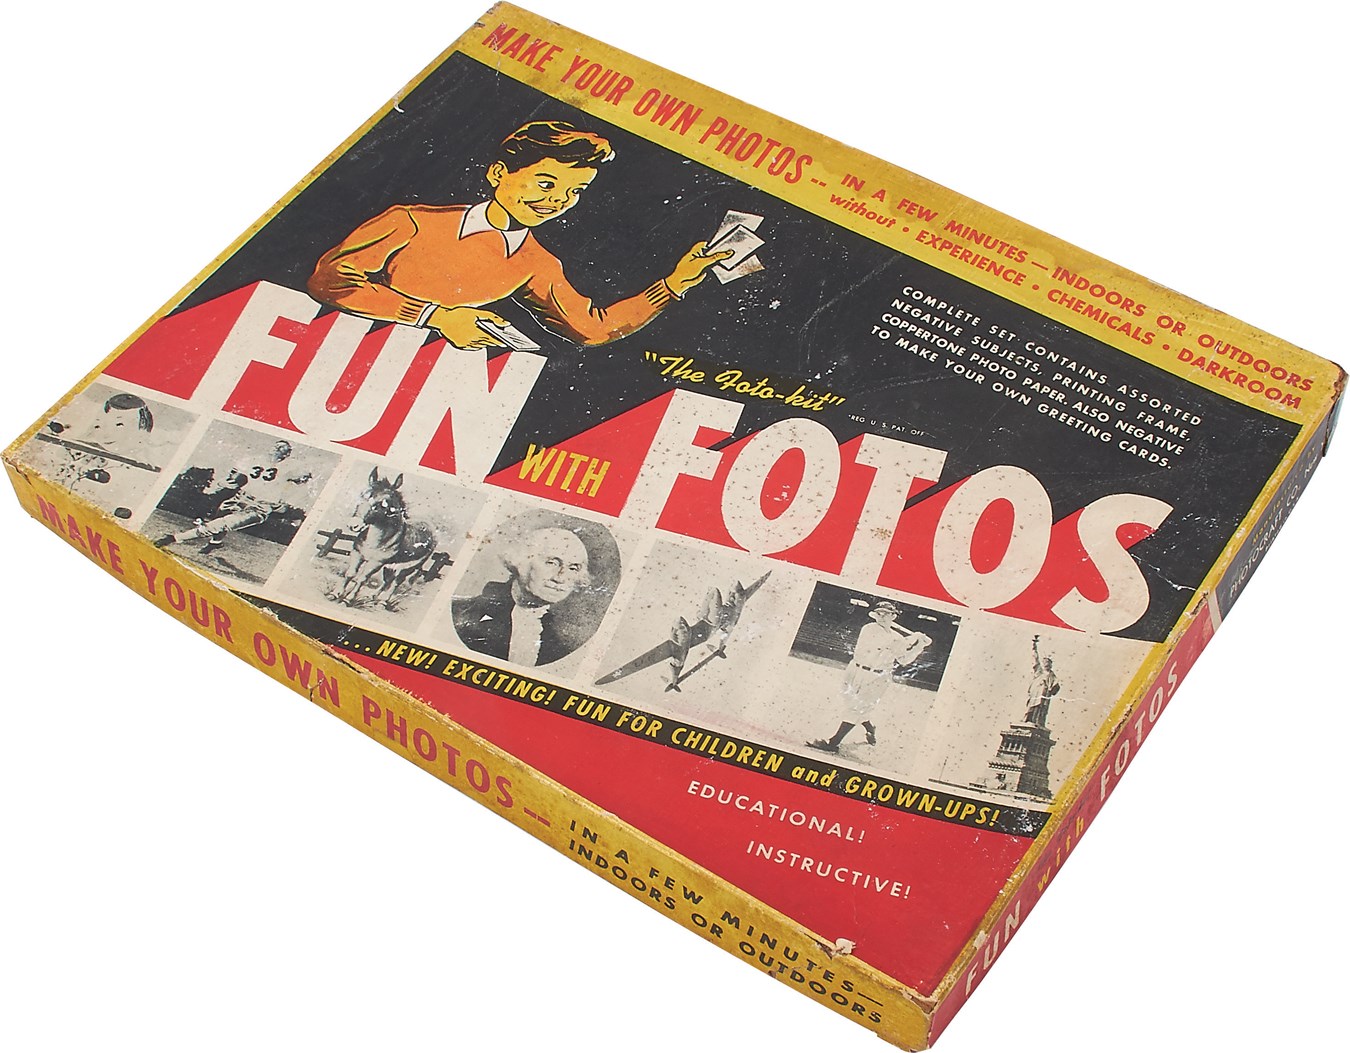 Baseball and Trading Cards - 1940s "Fun With Fotos" Game with Joe DiMaggio Card - Similar to 1948 Topps Magic Photos